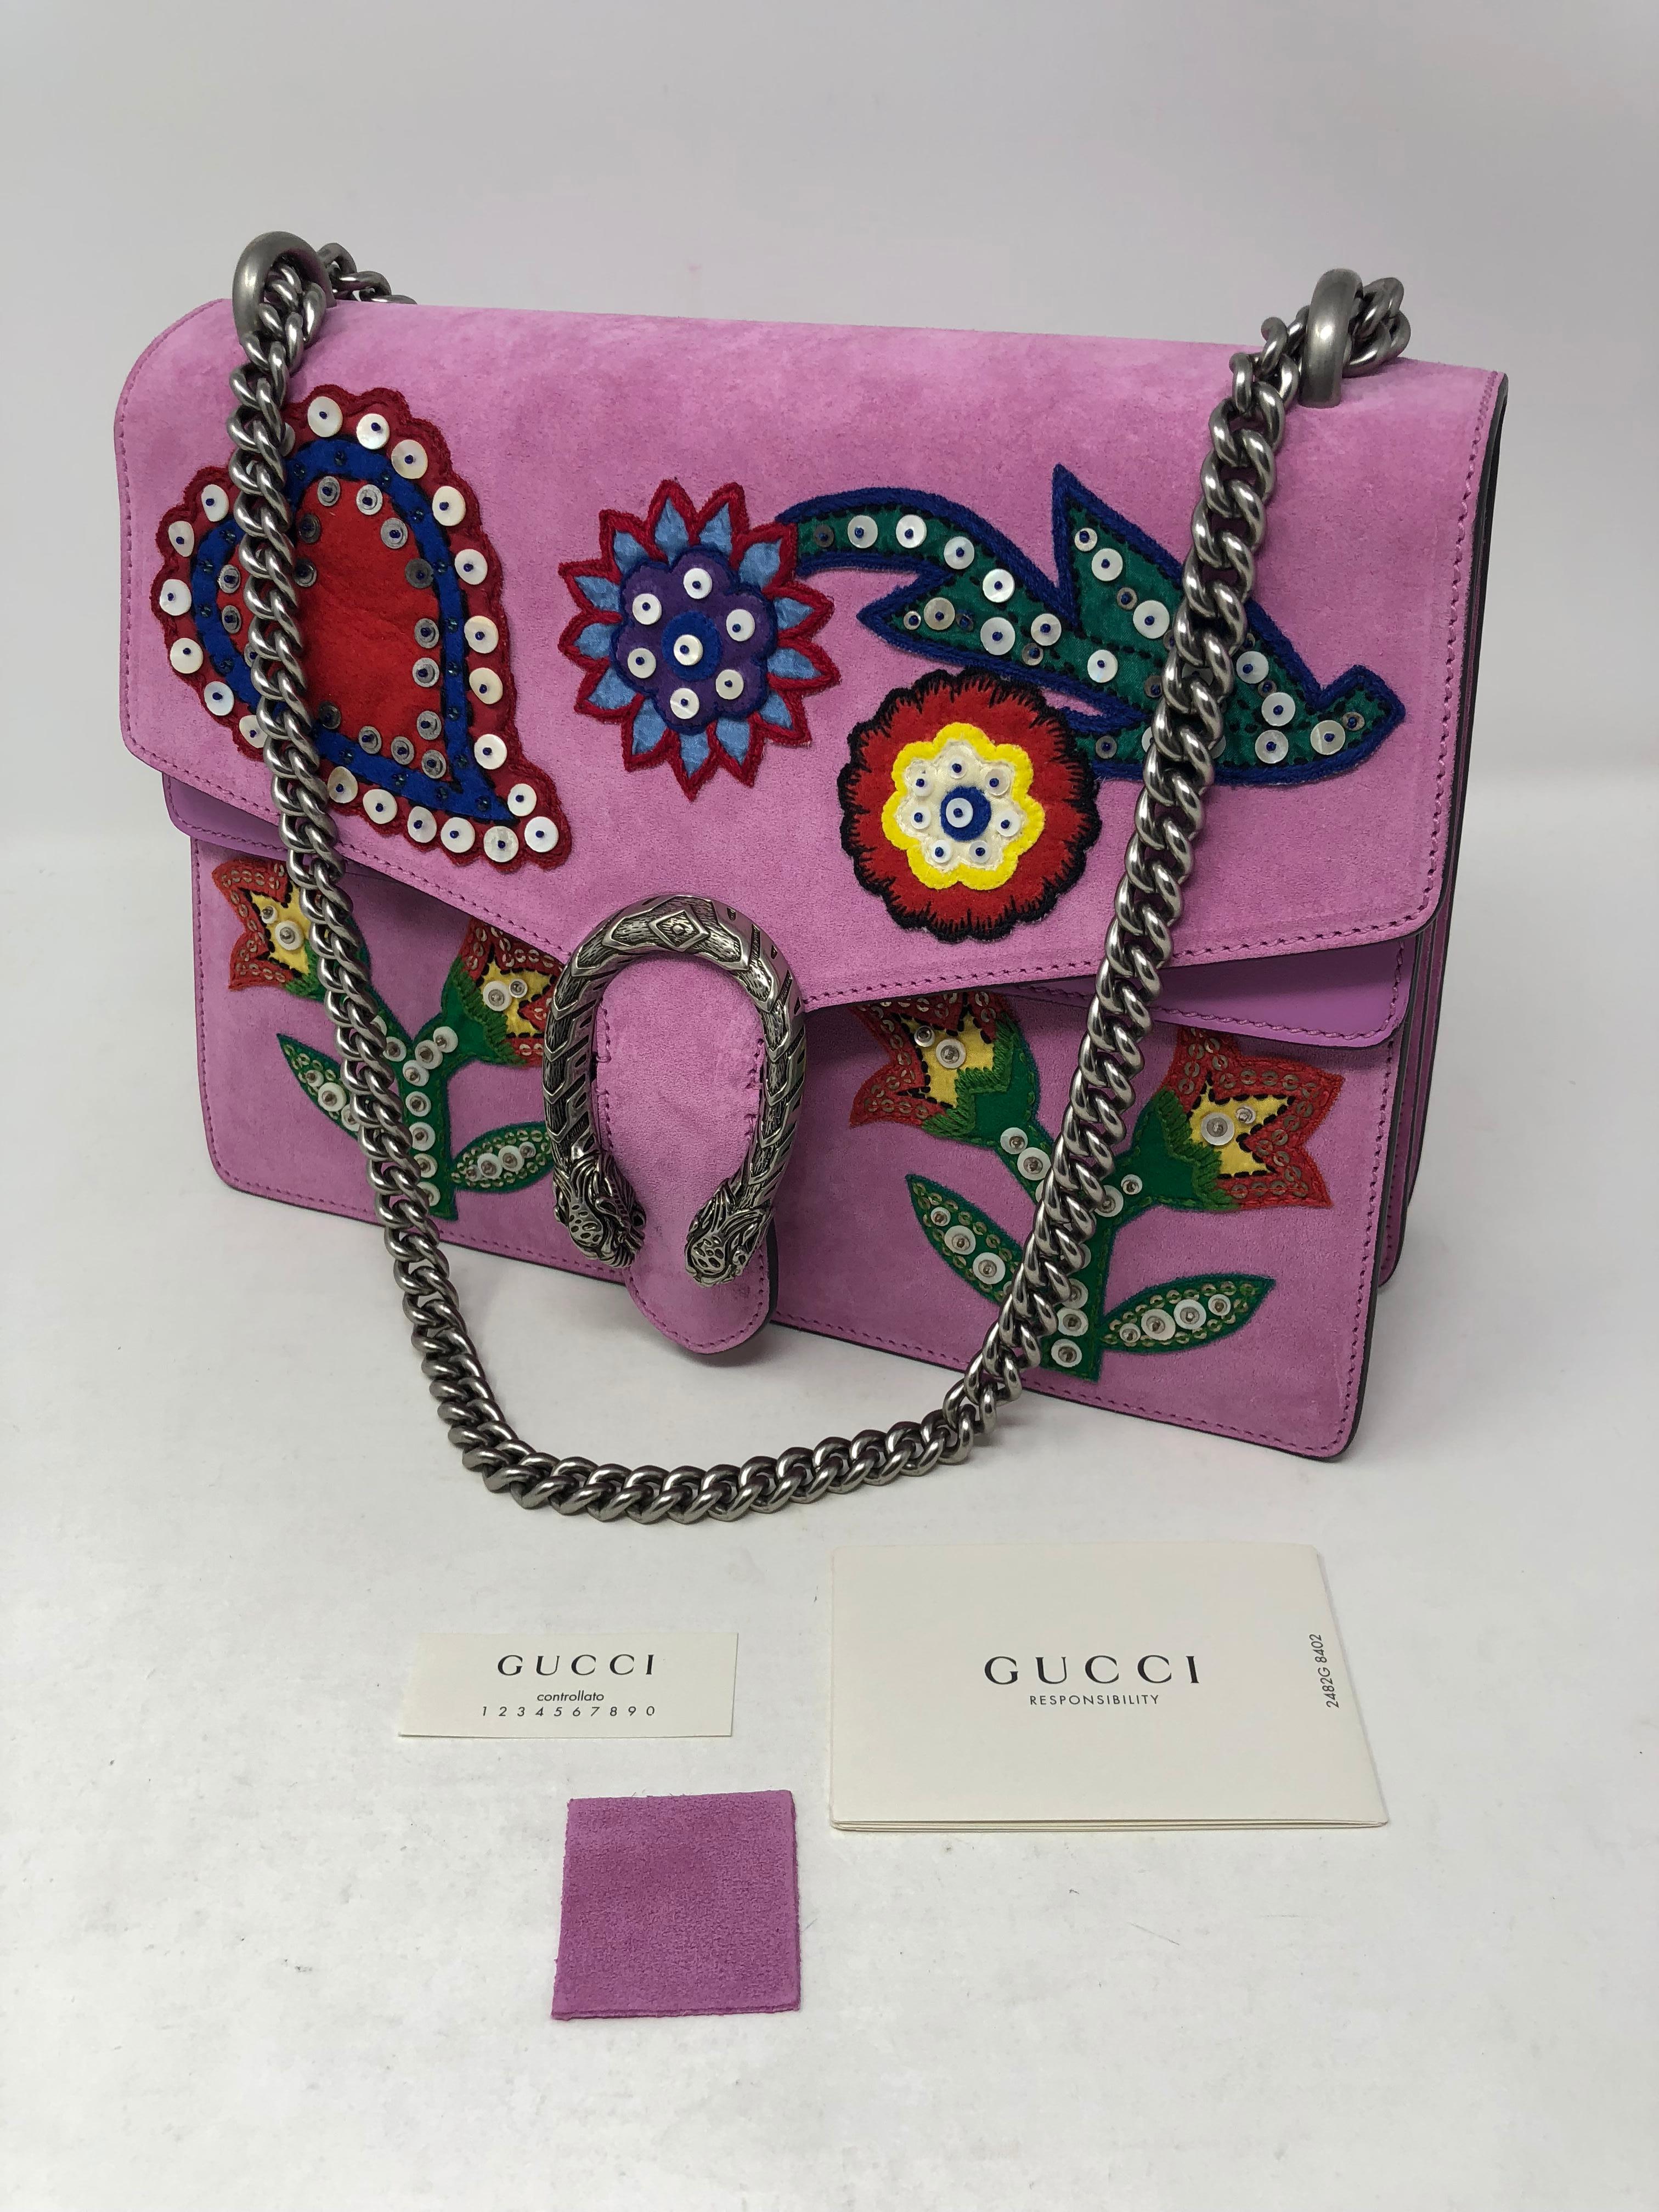 Gucci Dionysus Flower embroidered suede bag. Pink color suede bag with silver hardware. Brand new condition. Limited edition and 2 way bag. Sold out. Gucci shoulder bag with leather detail. Beaded heart and floral appliques. Sliding chain strap can